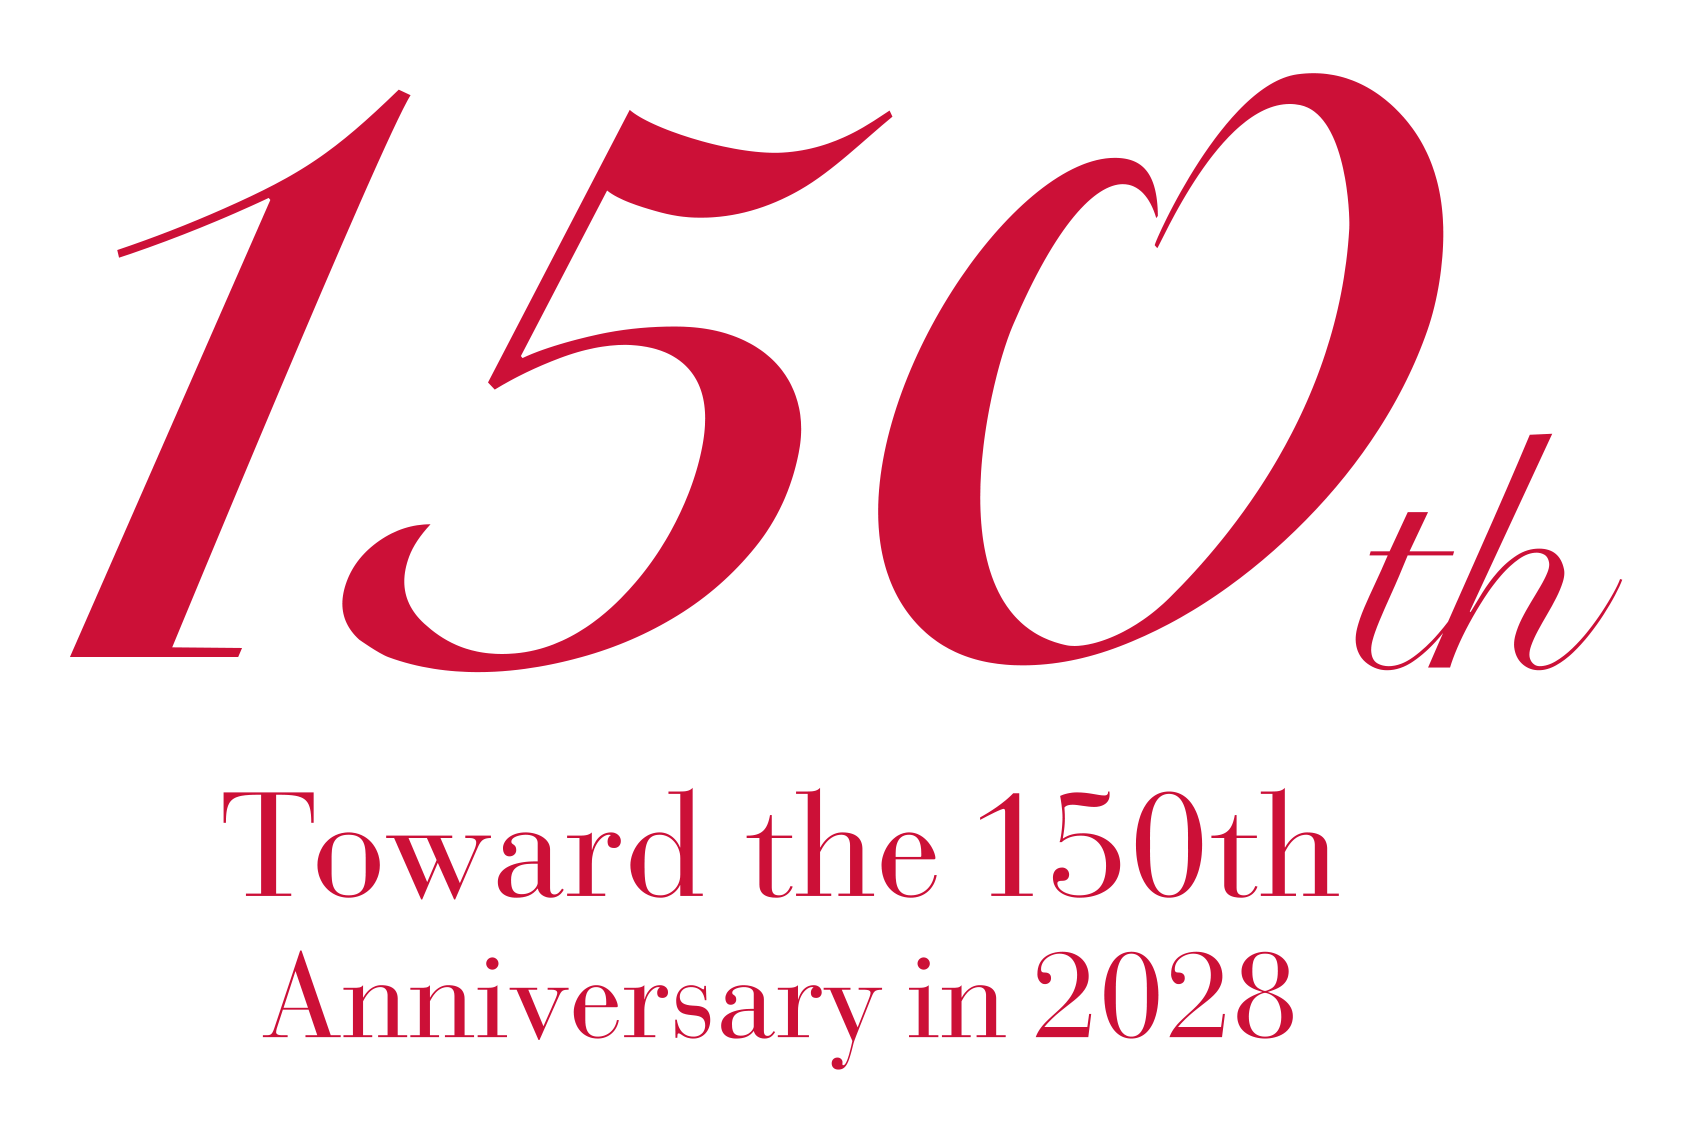 150th Toward the 150th Anniversary in 2028